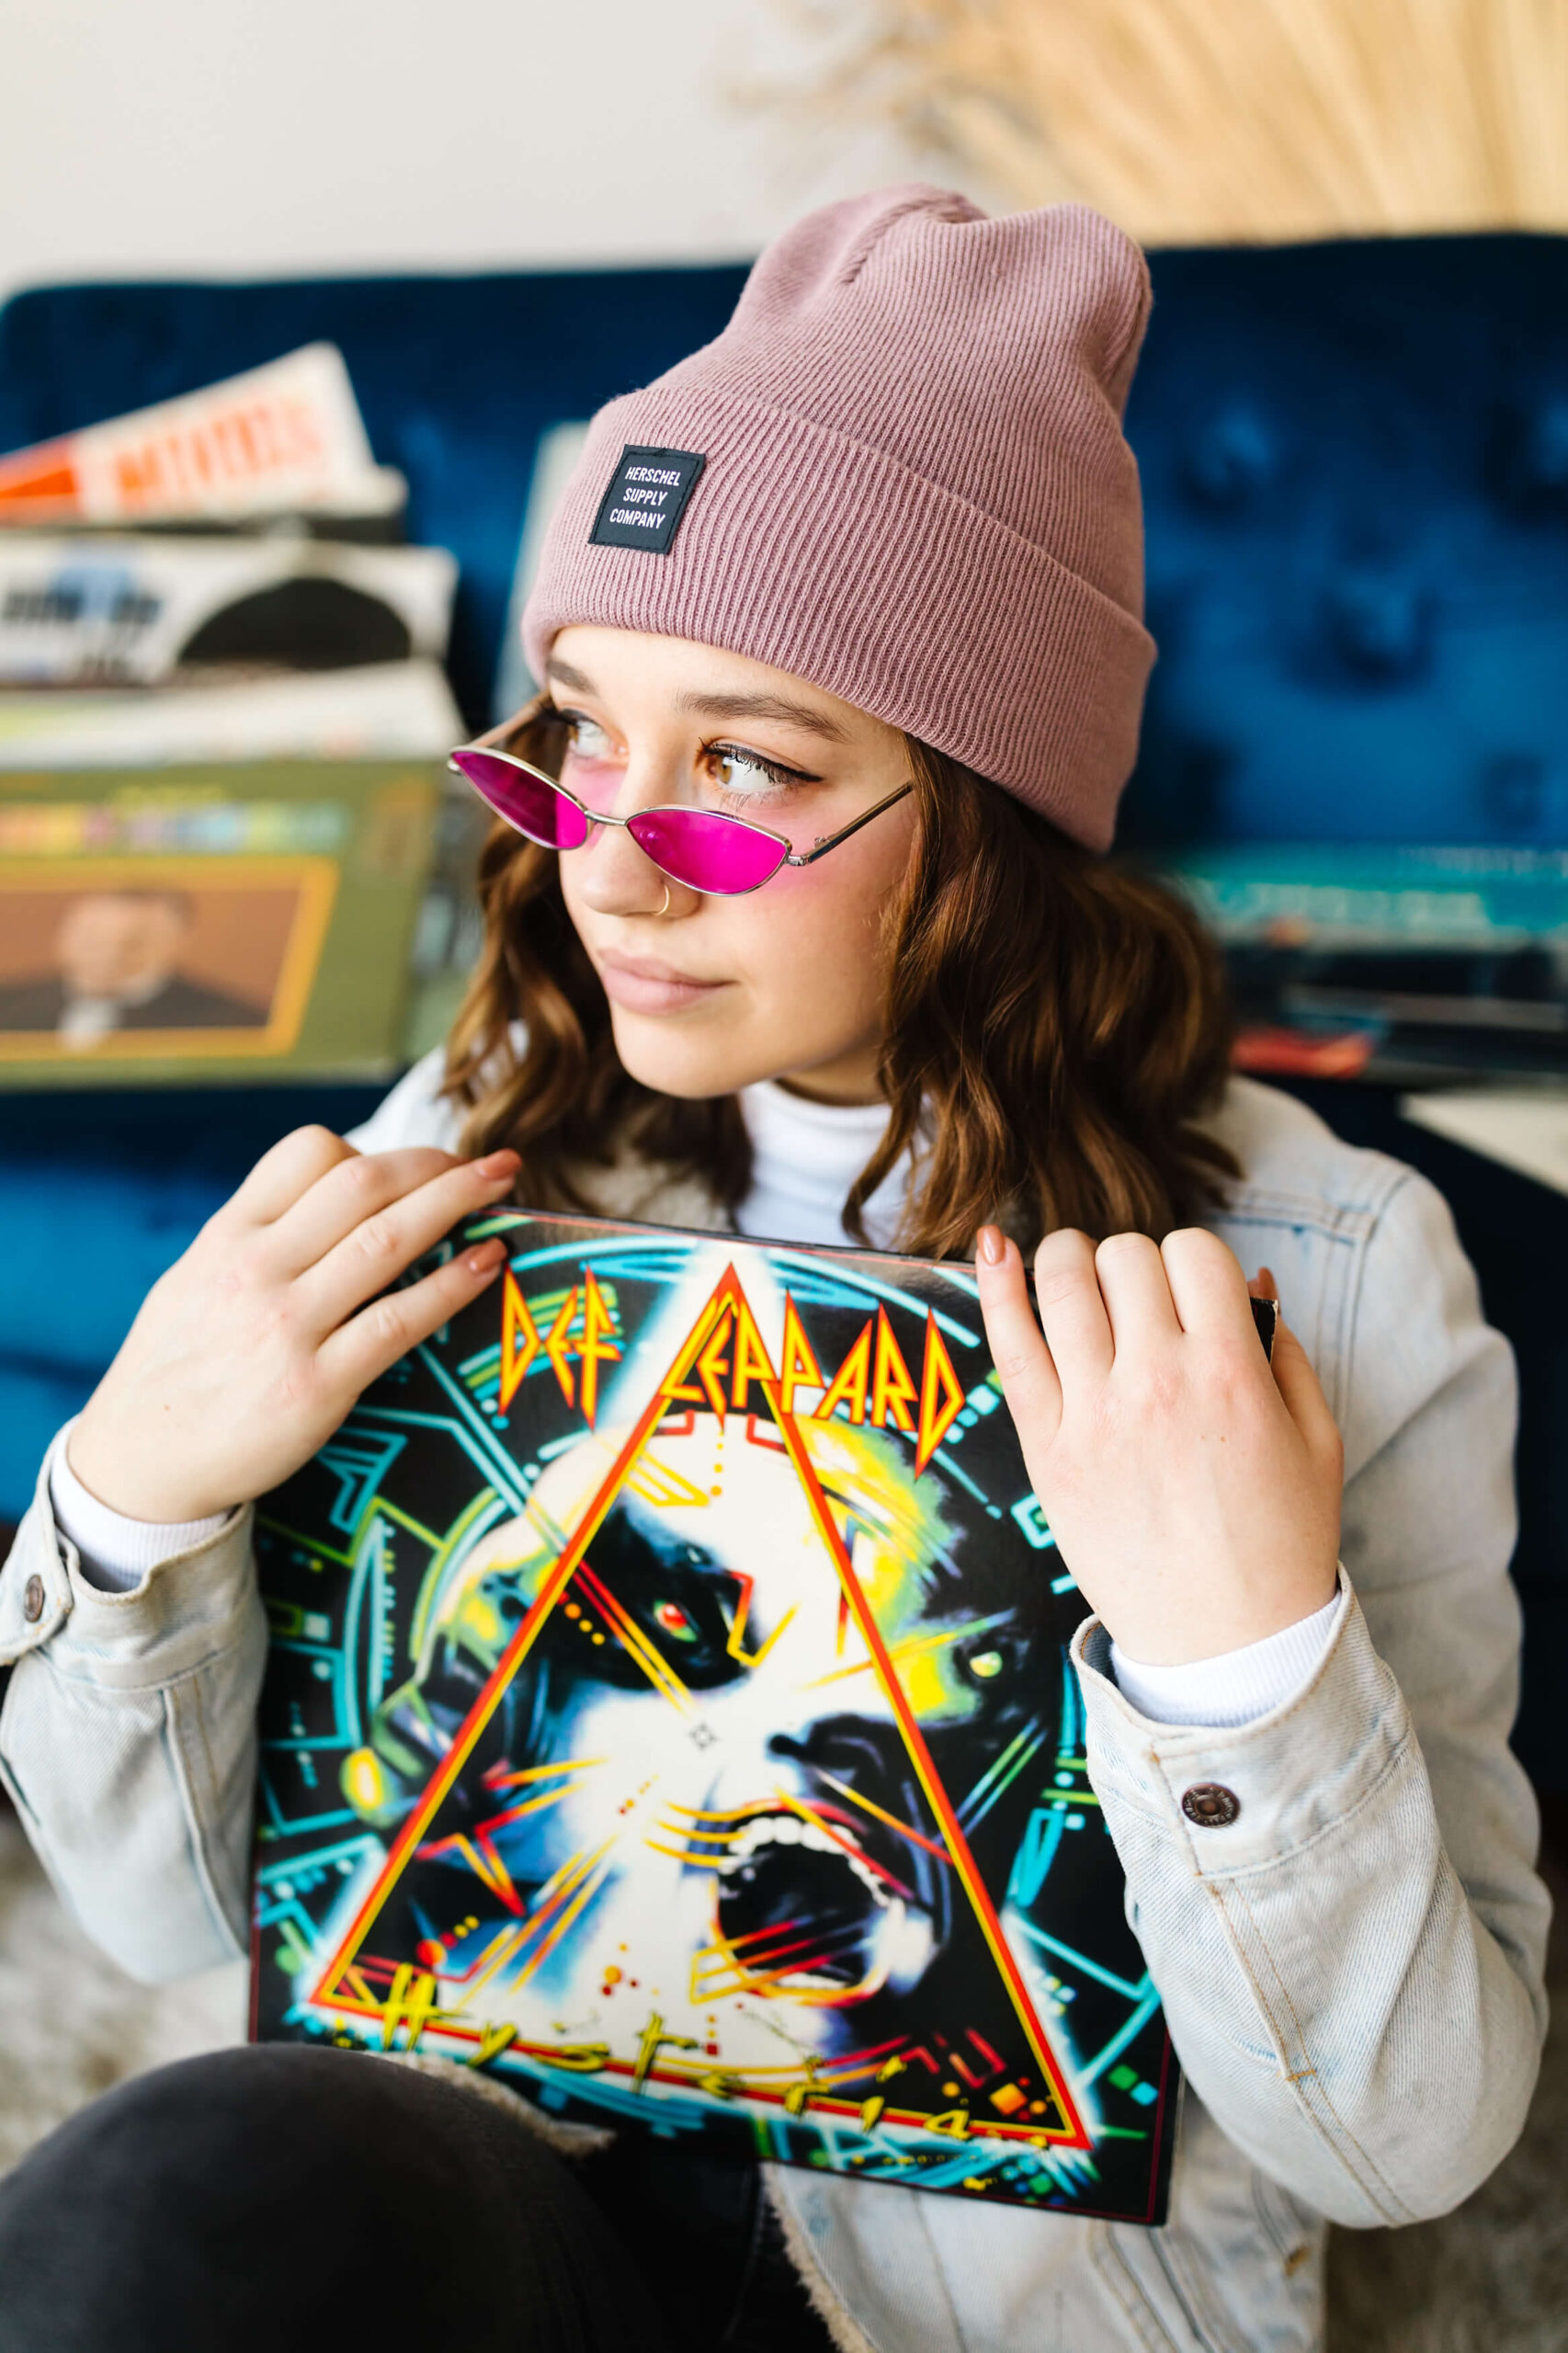 girl wearing pink beanie and blue jean jacket, leaning back on blue velvet couch next to record player and holding Def Leopard vinyl record with albums scattered around, during senior studio photoshoot